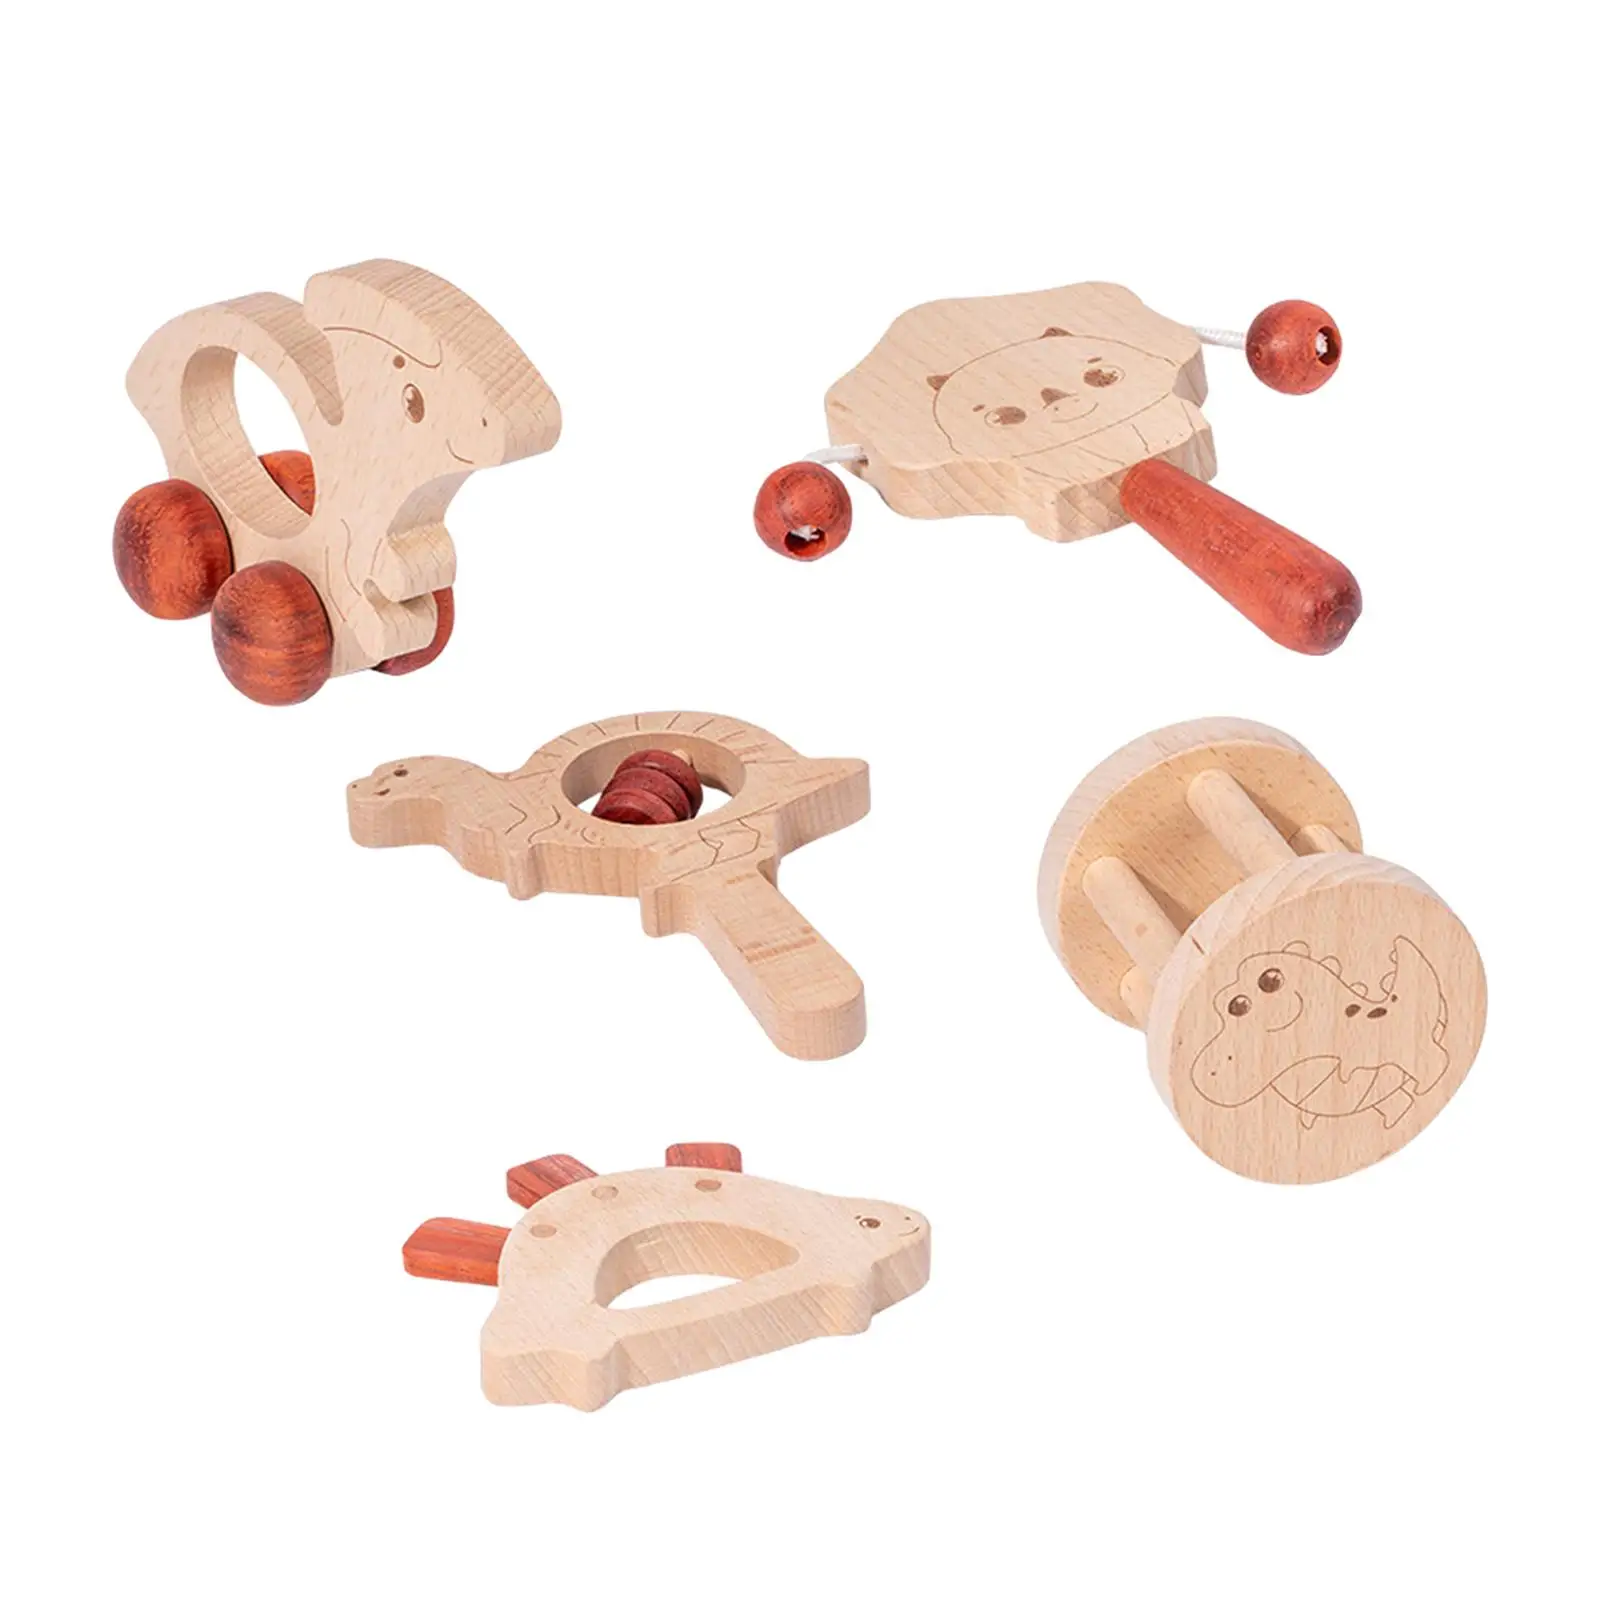 5Pcs Wooden Baby Toy Set Wood Car Early Learning Baby Rattle Wood Toy Rattles Montessori Toys for Babies Infant 6-12 Months